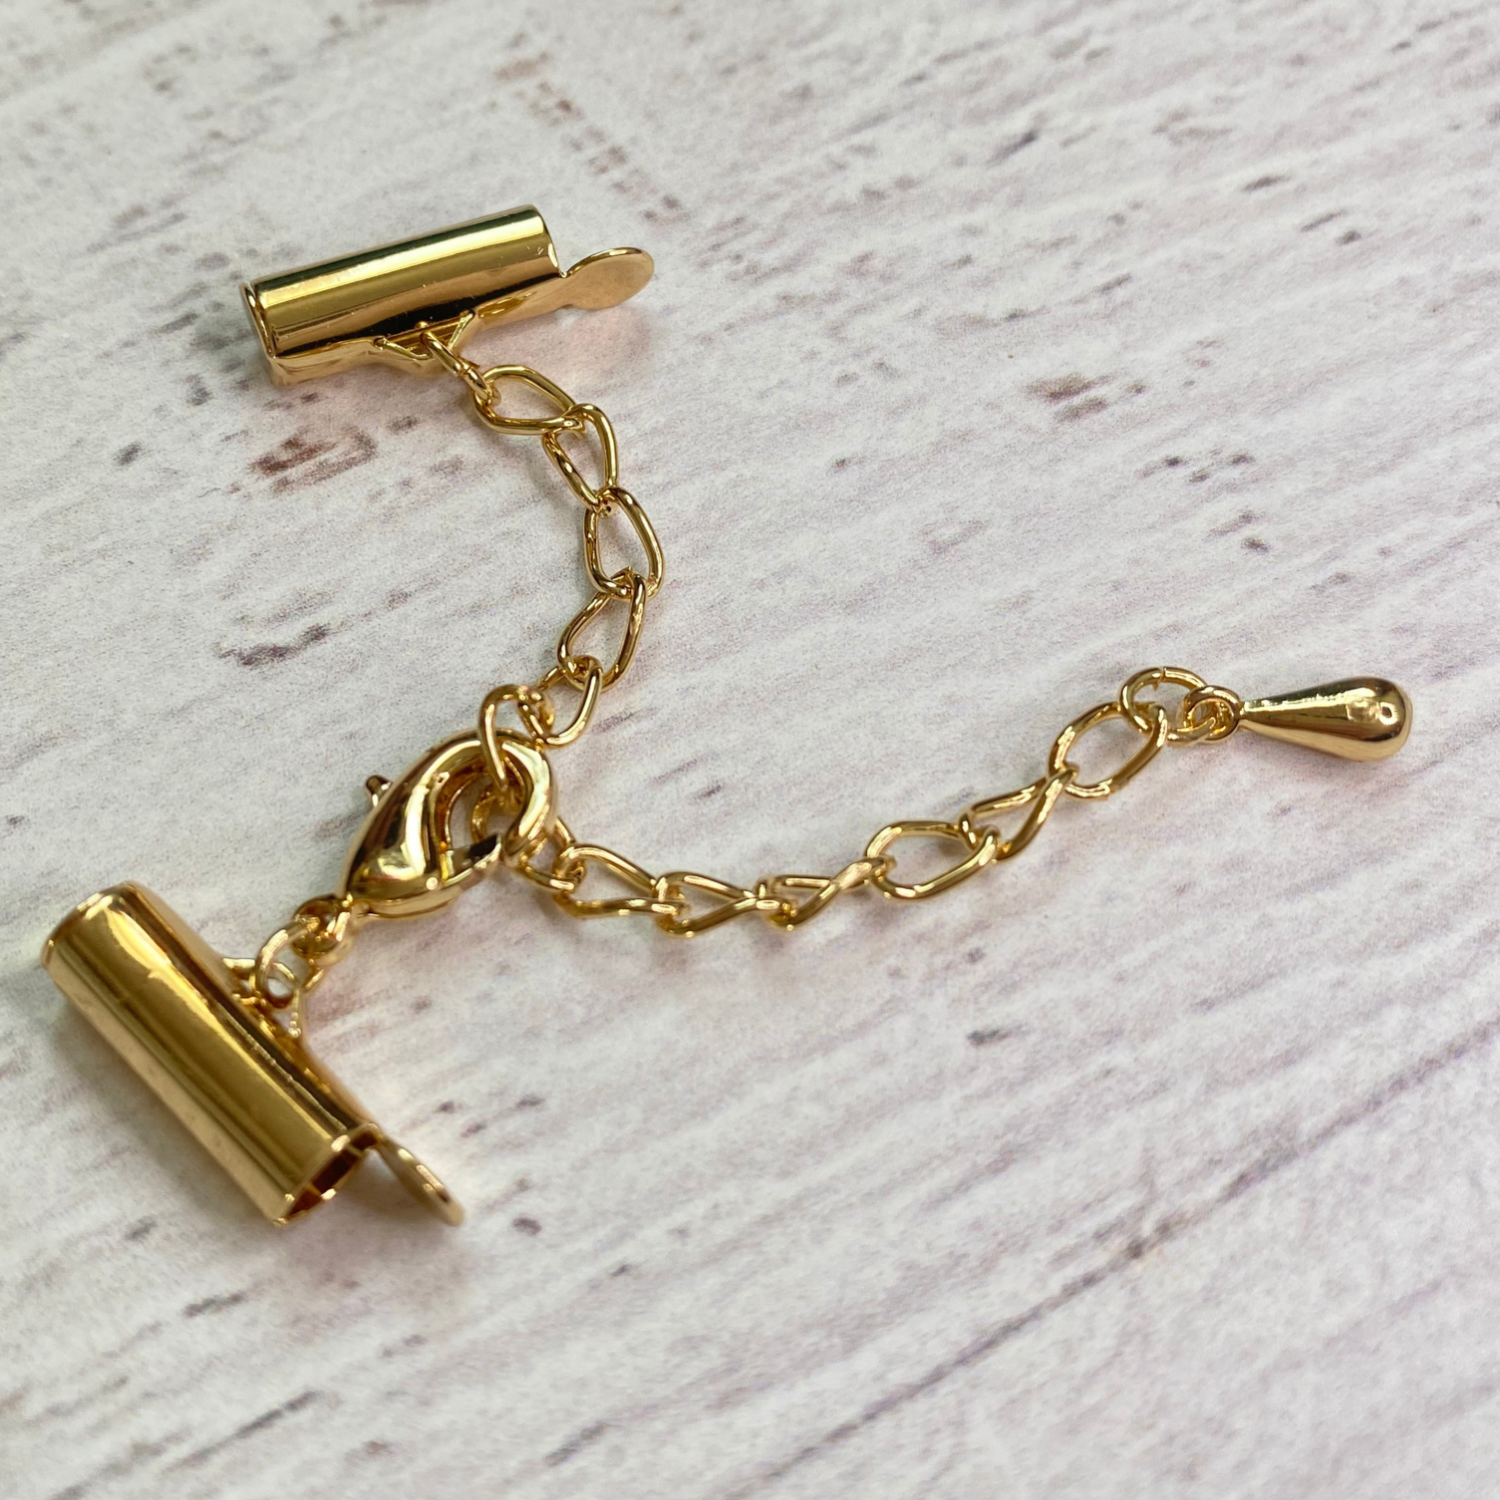 Beadalon Slide Connector 13mm Gold in Color